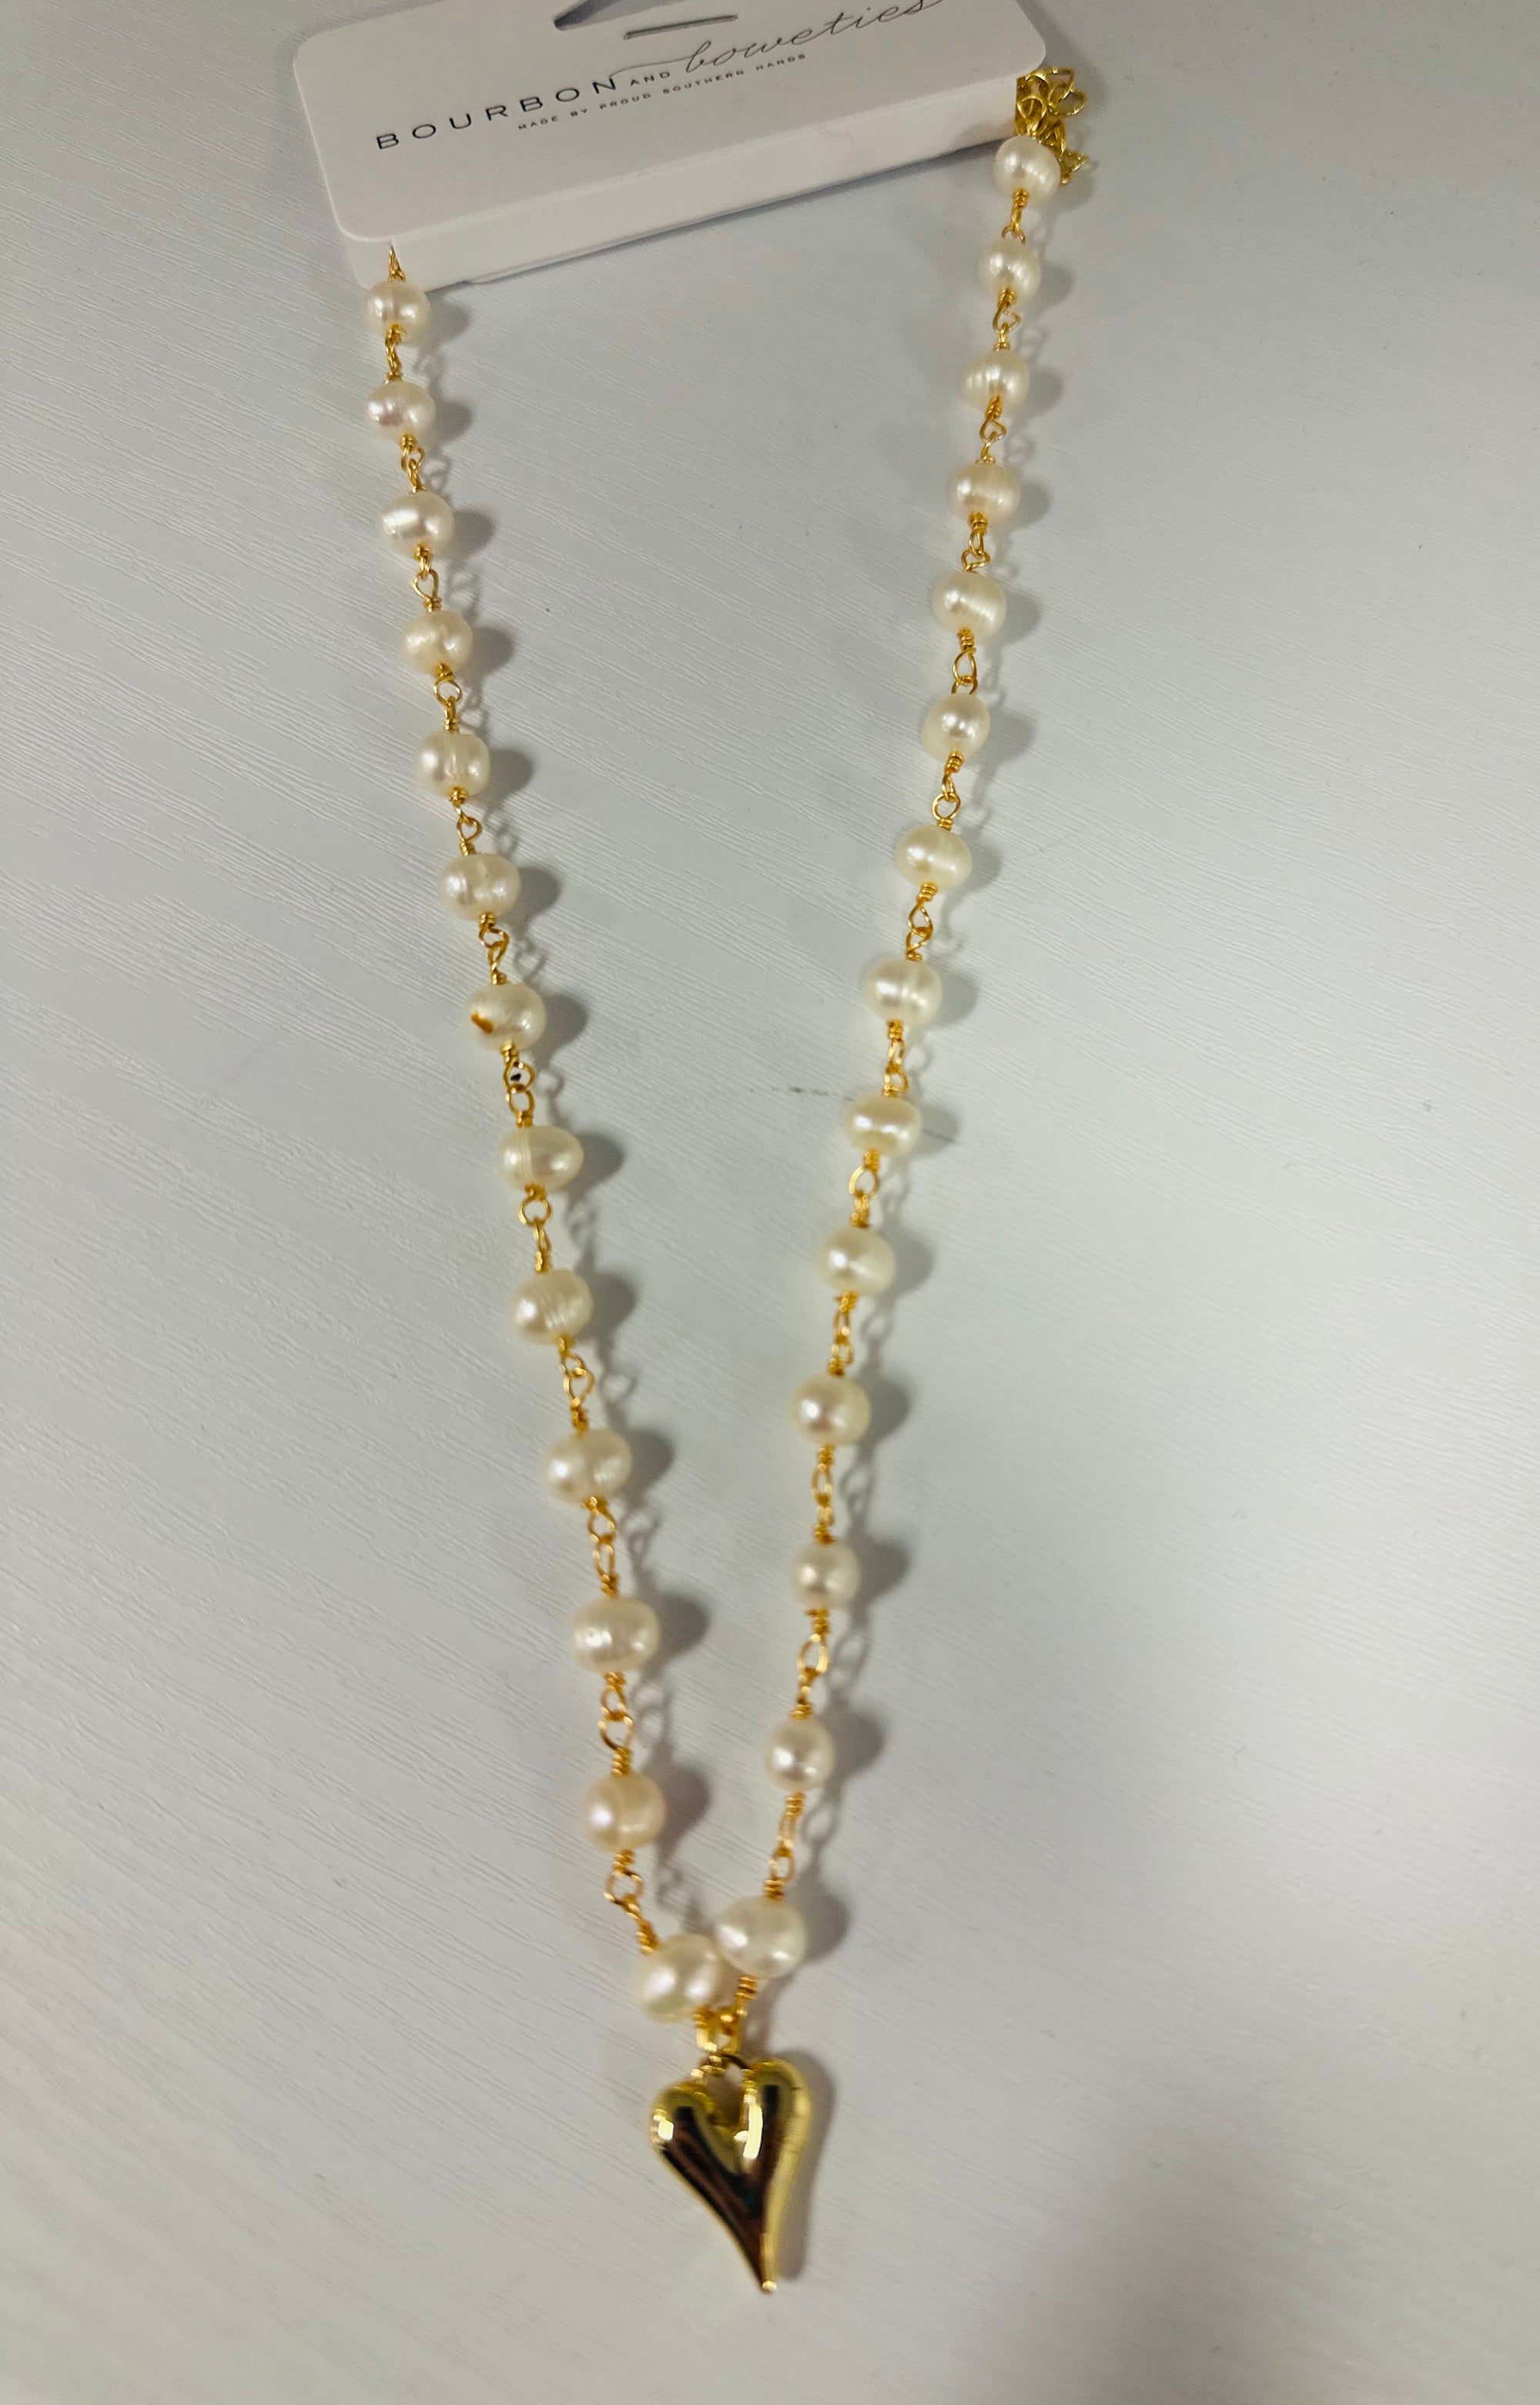 Charlotte Necklace Pearl Chain/Heart